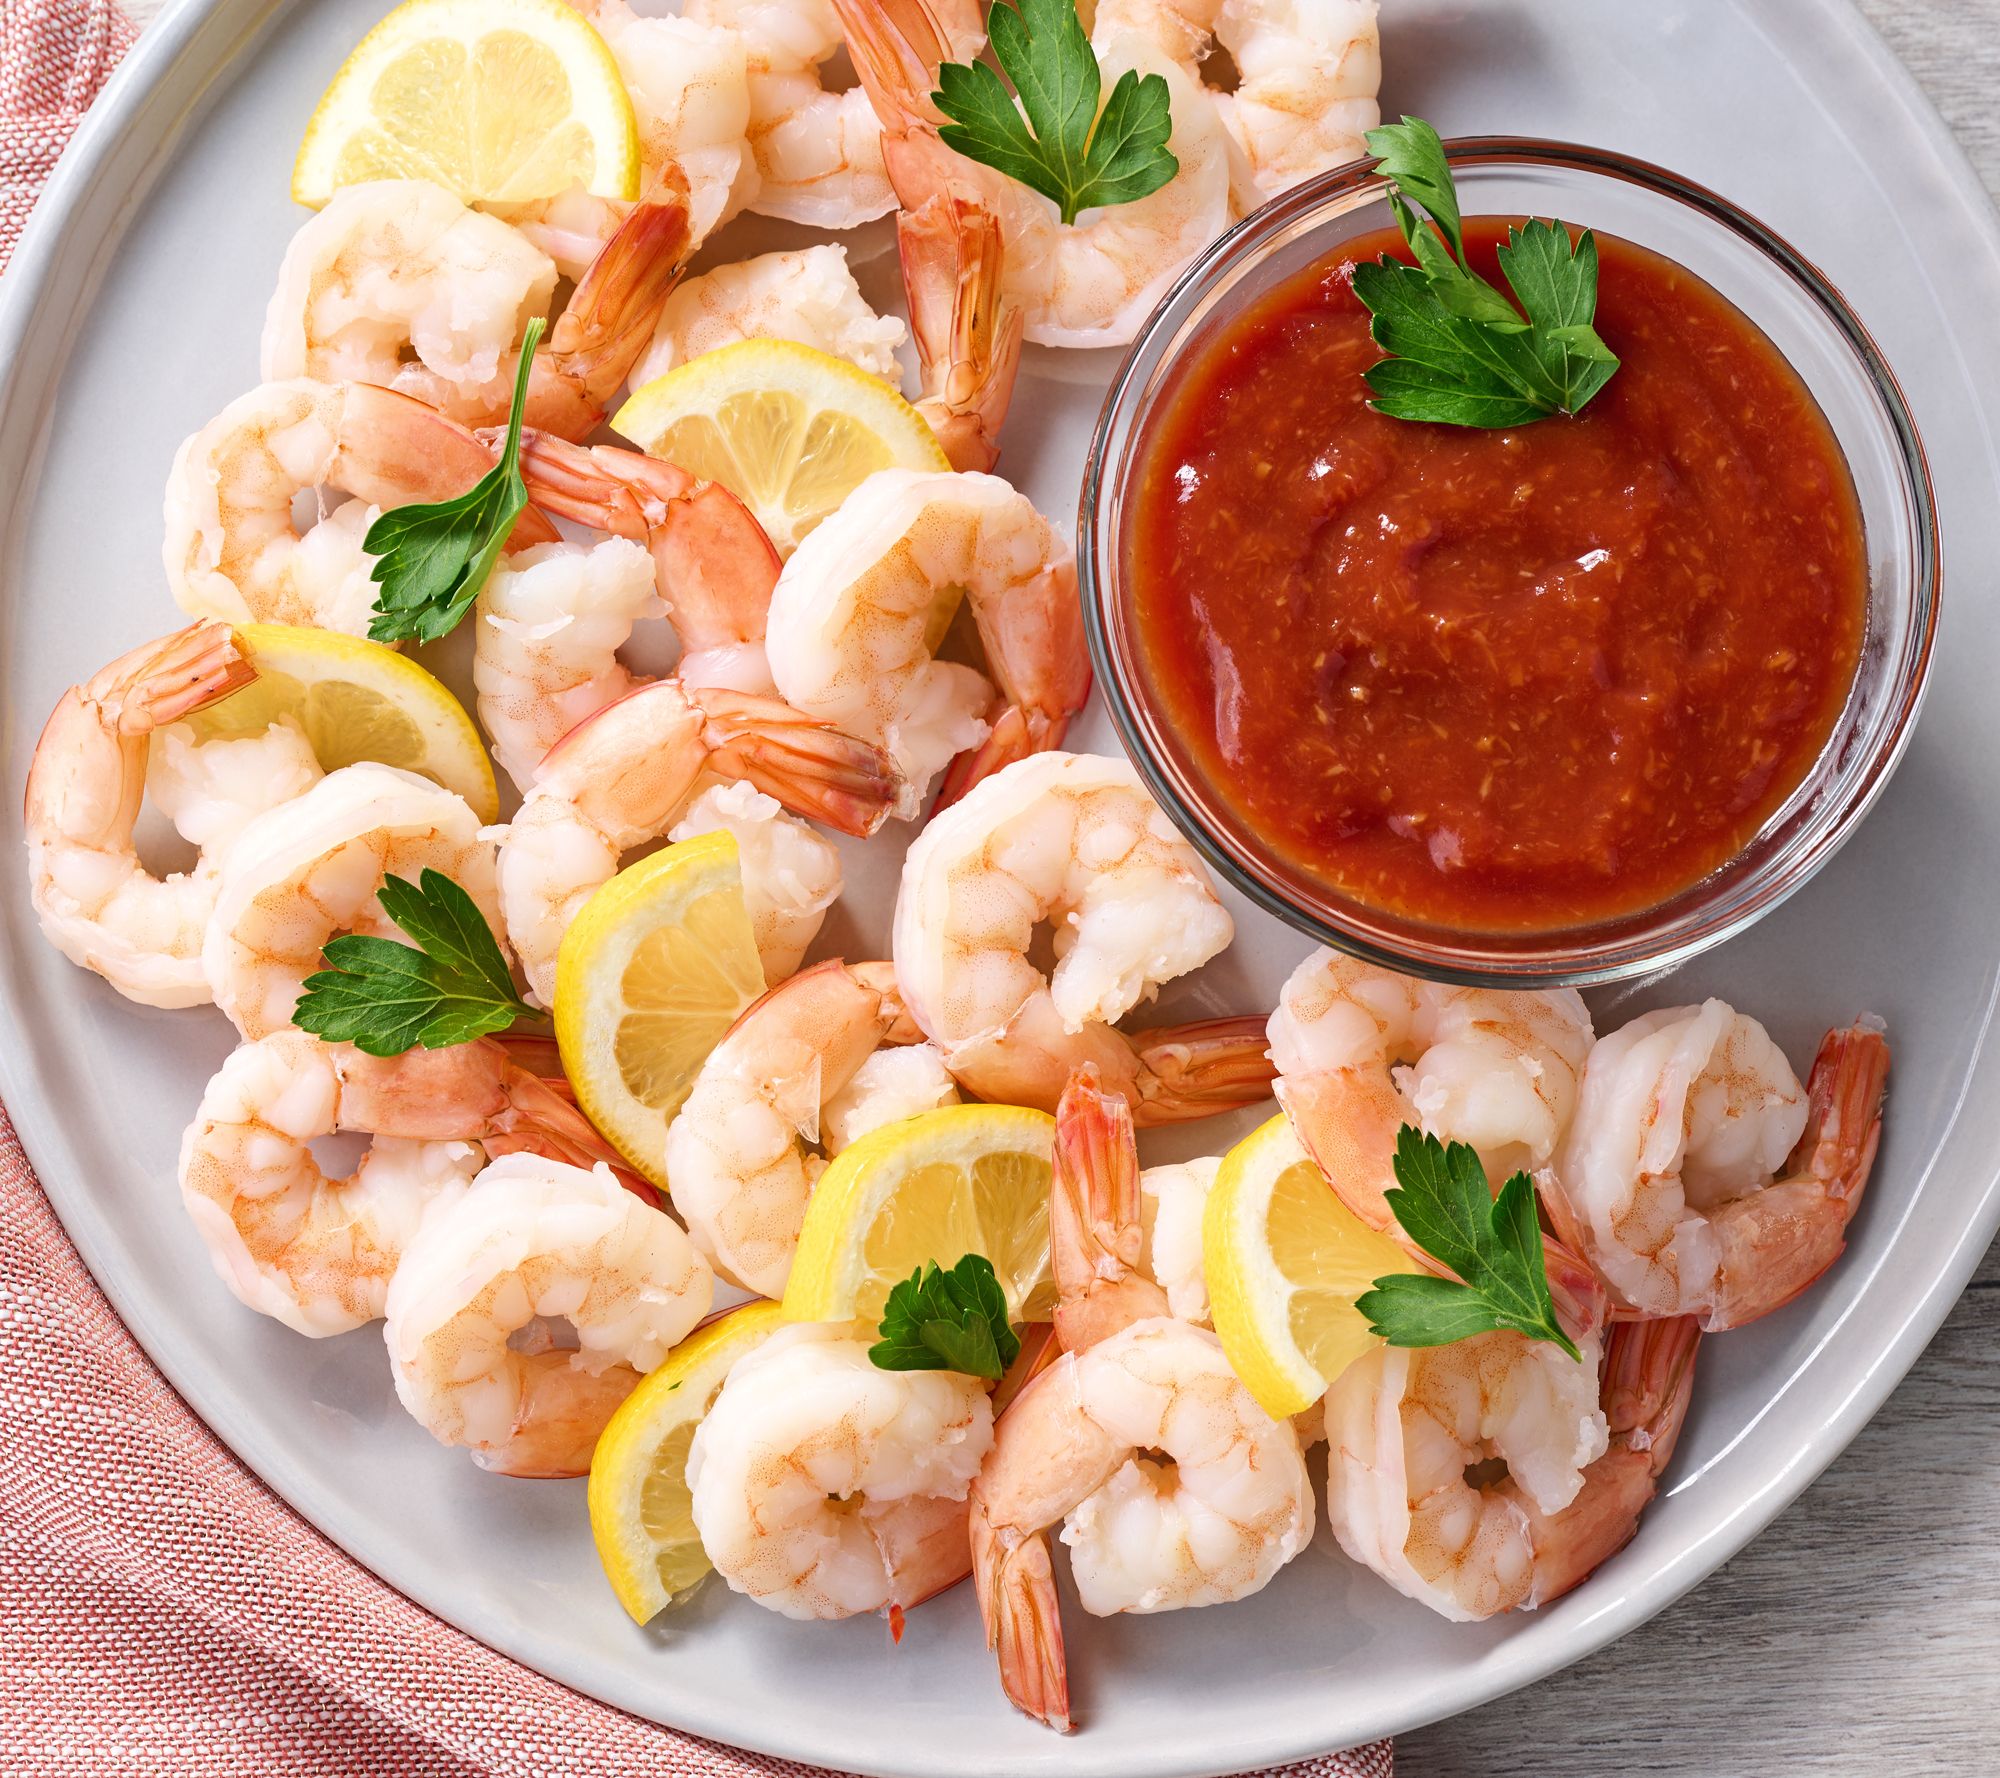 Steamed Jumbo Shrimp with Cocktail Sauce and Remoulade (1 lb)